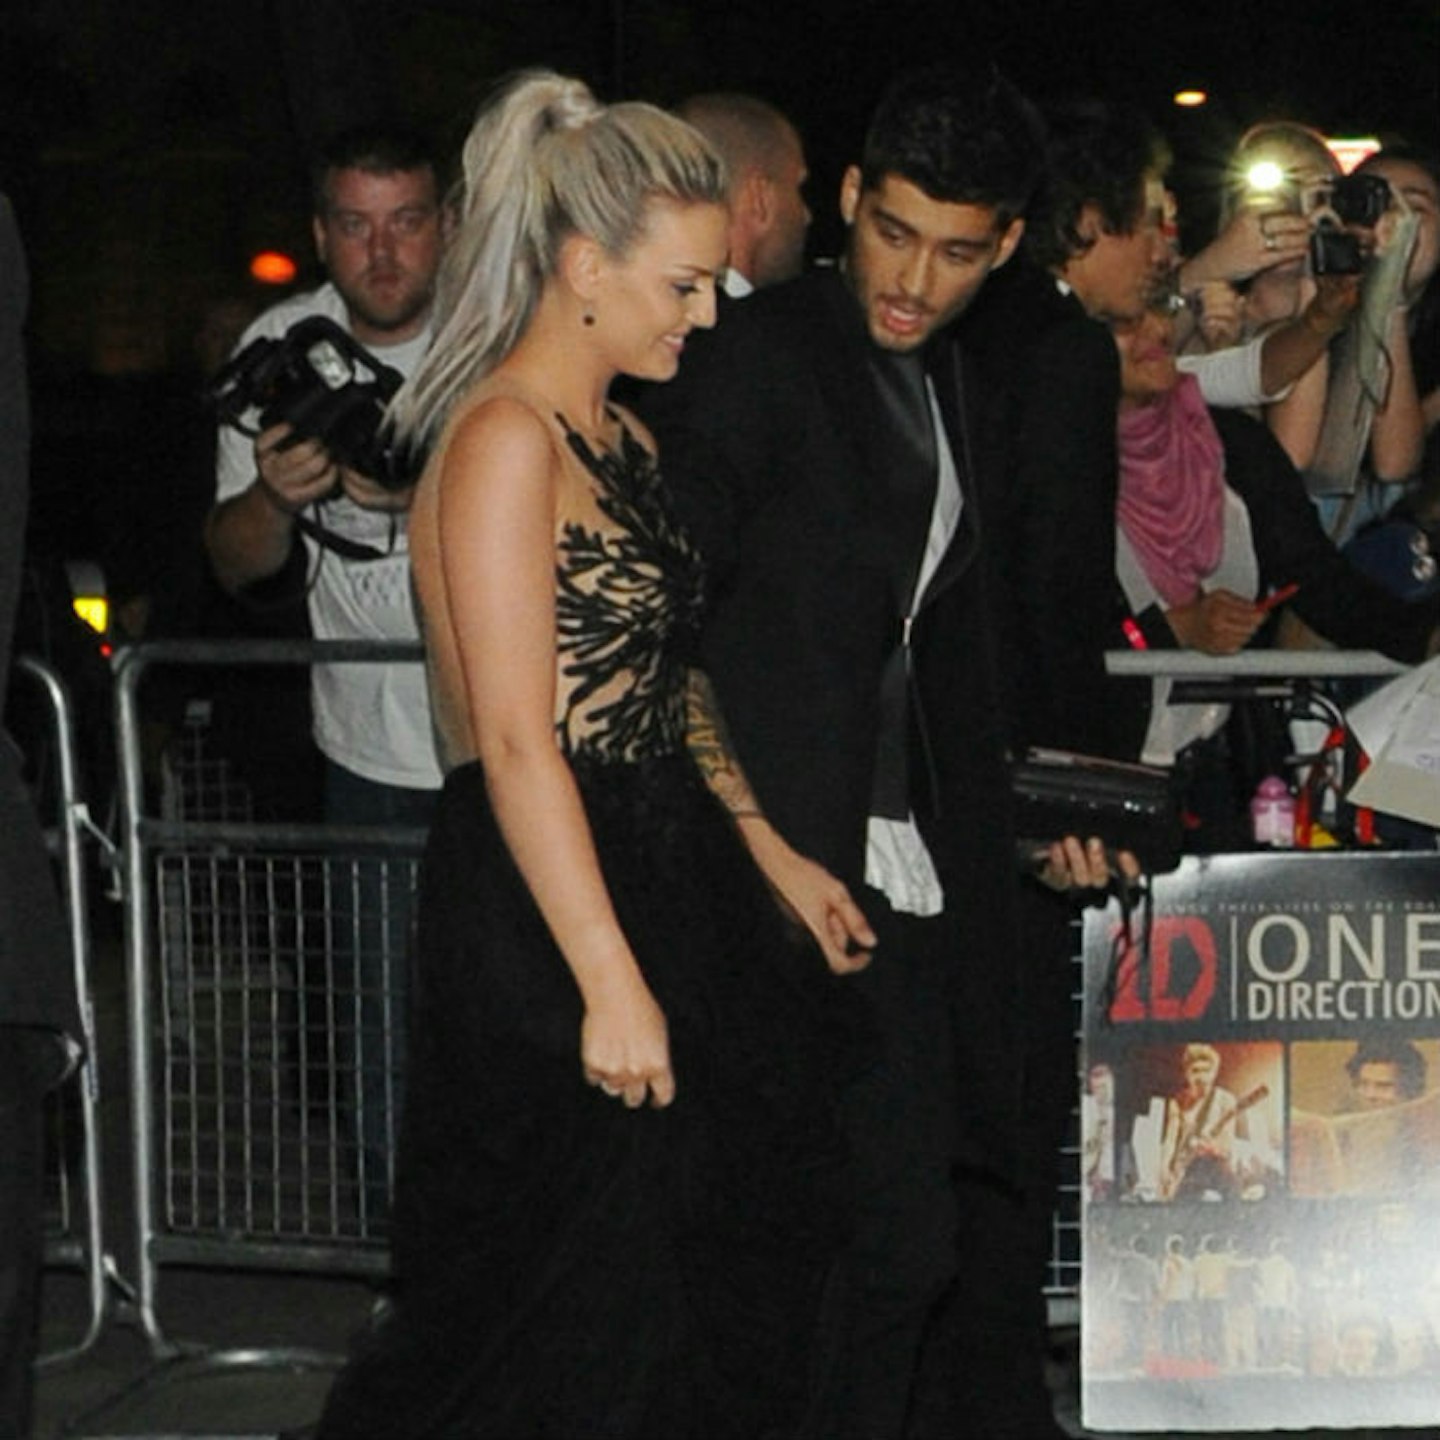 Zayn dumped Perrie over text last month